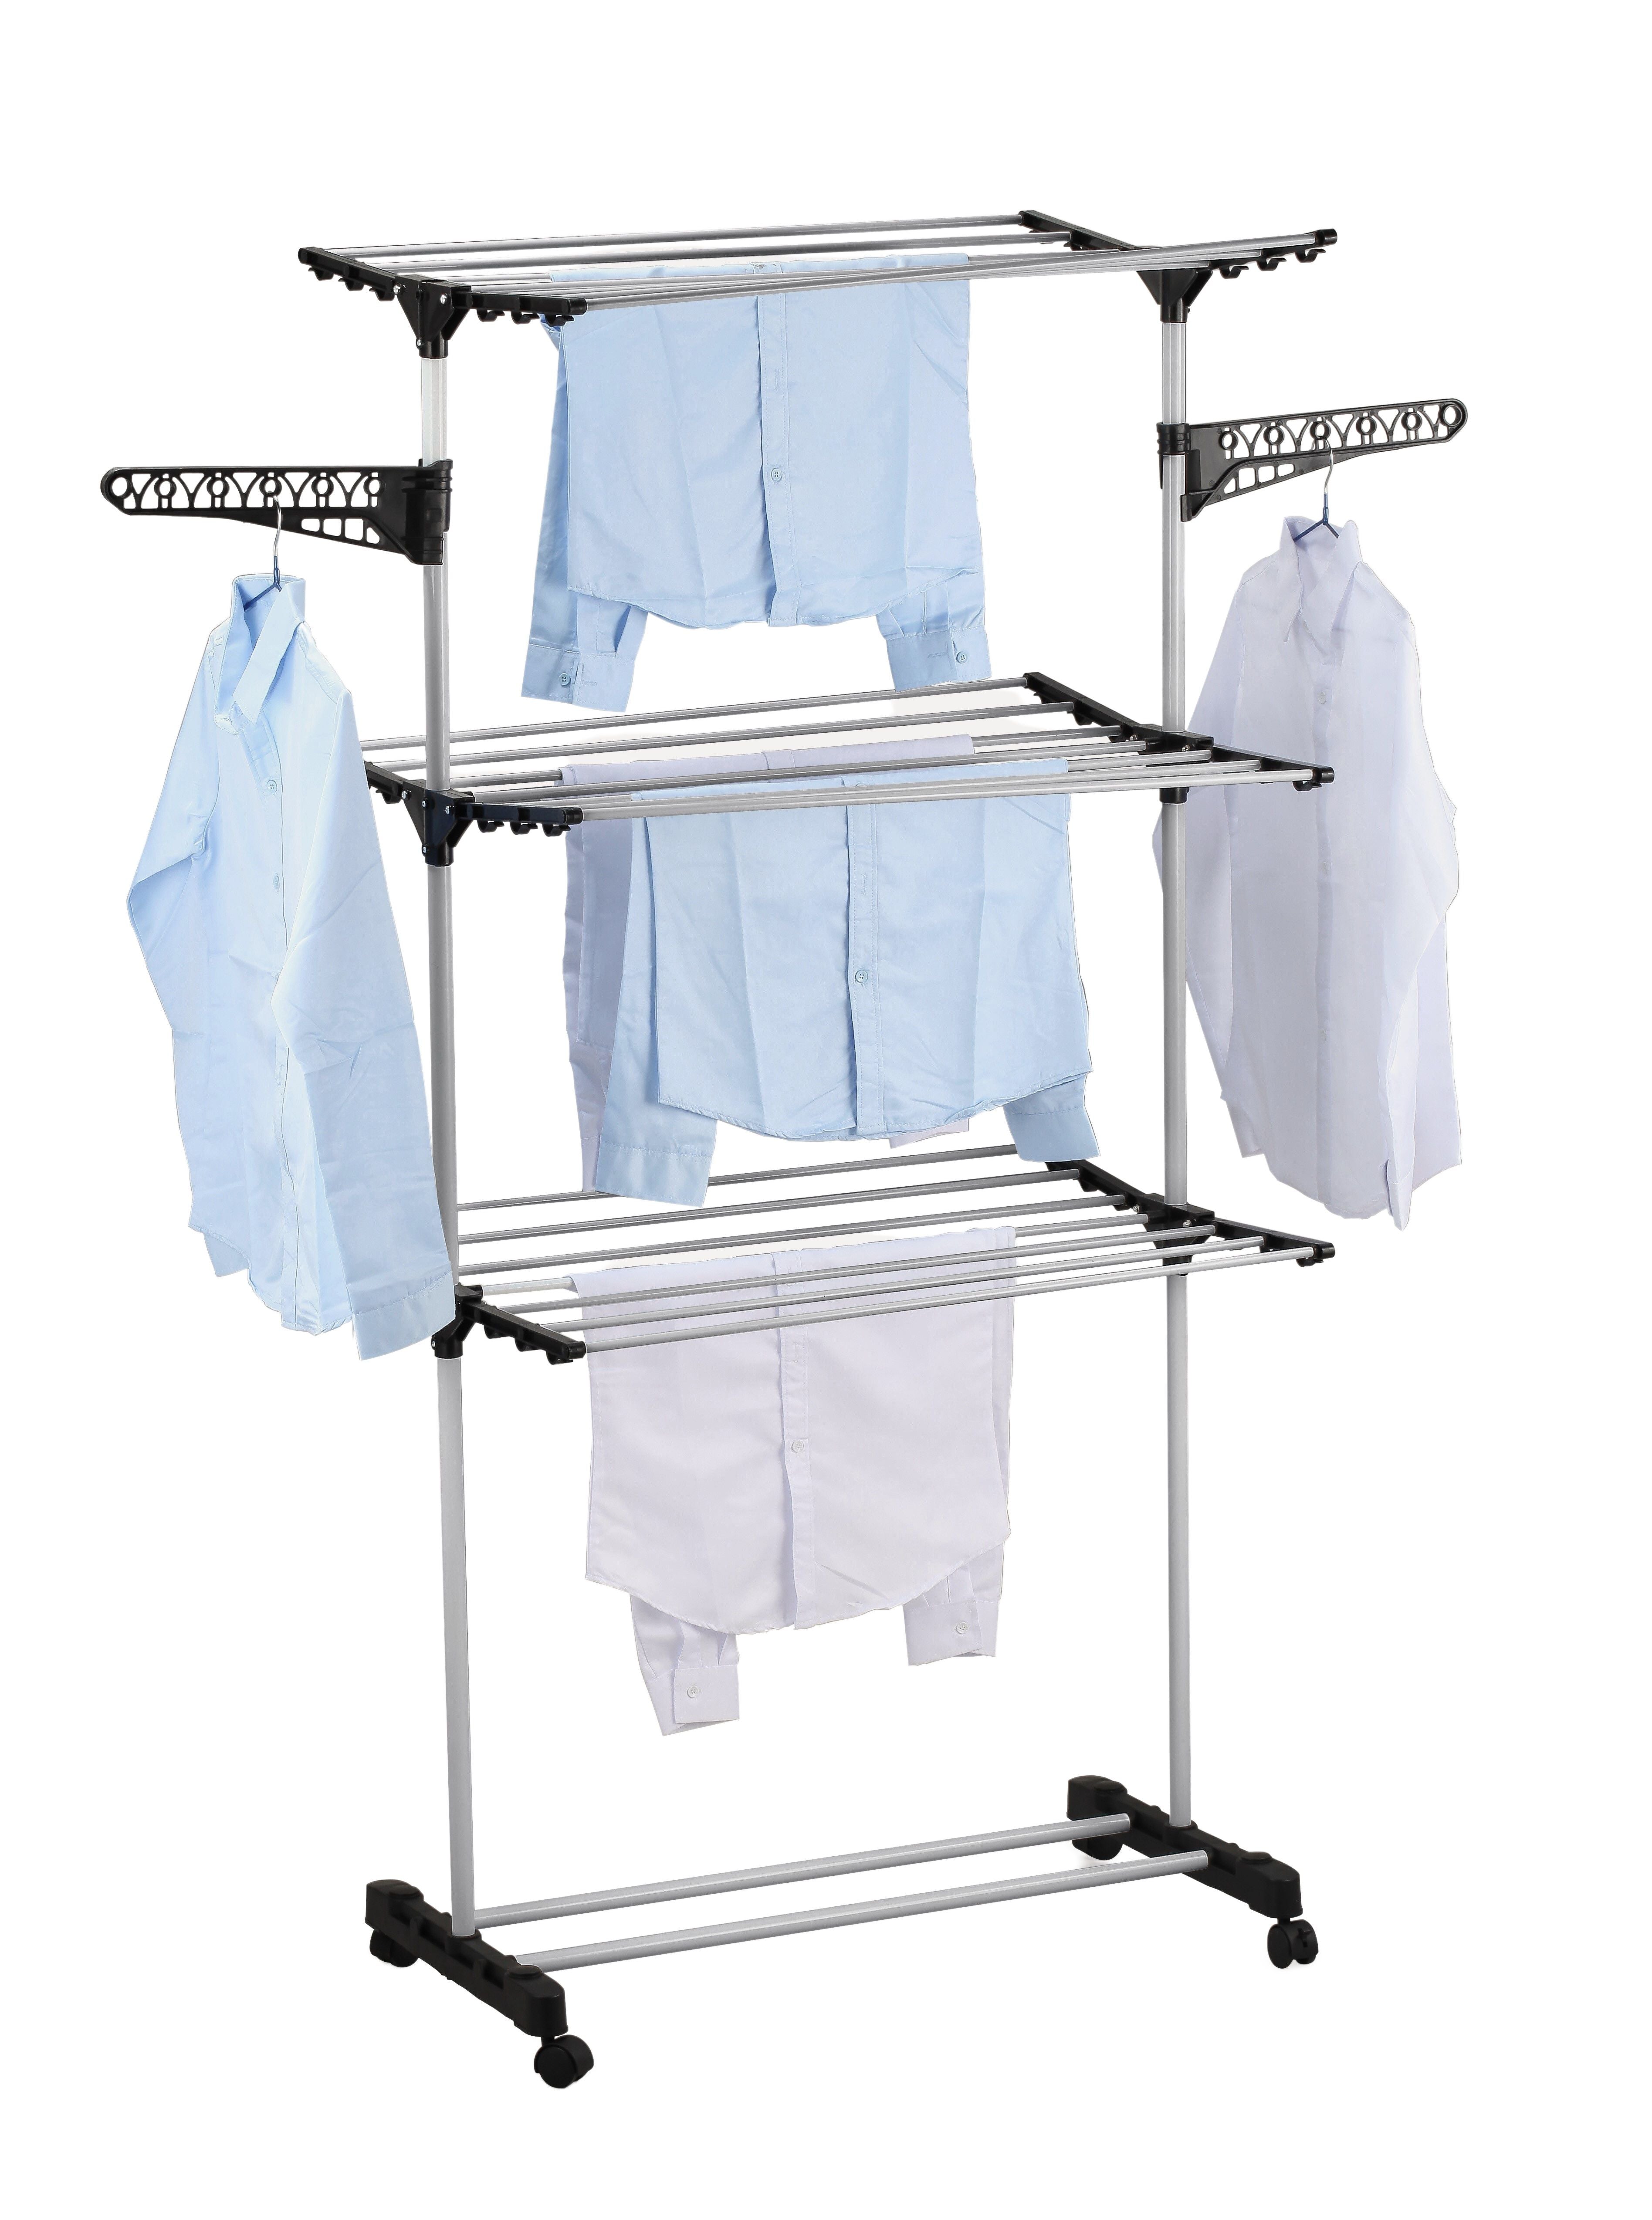 Folding 3 Tier Clothes Laundry Drying Rack with Stainless Steel Tubes for Indoor & Outdoor Home - SILBERSHELL